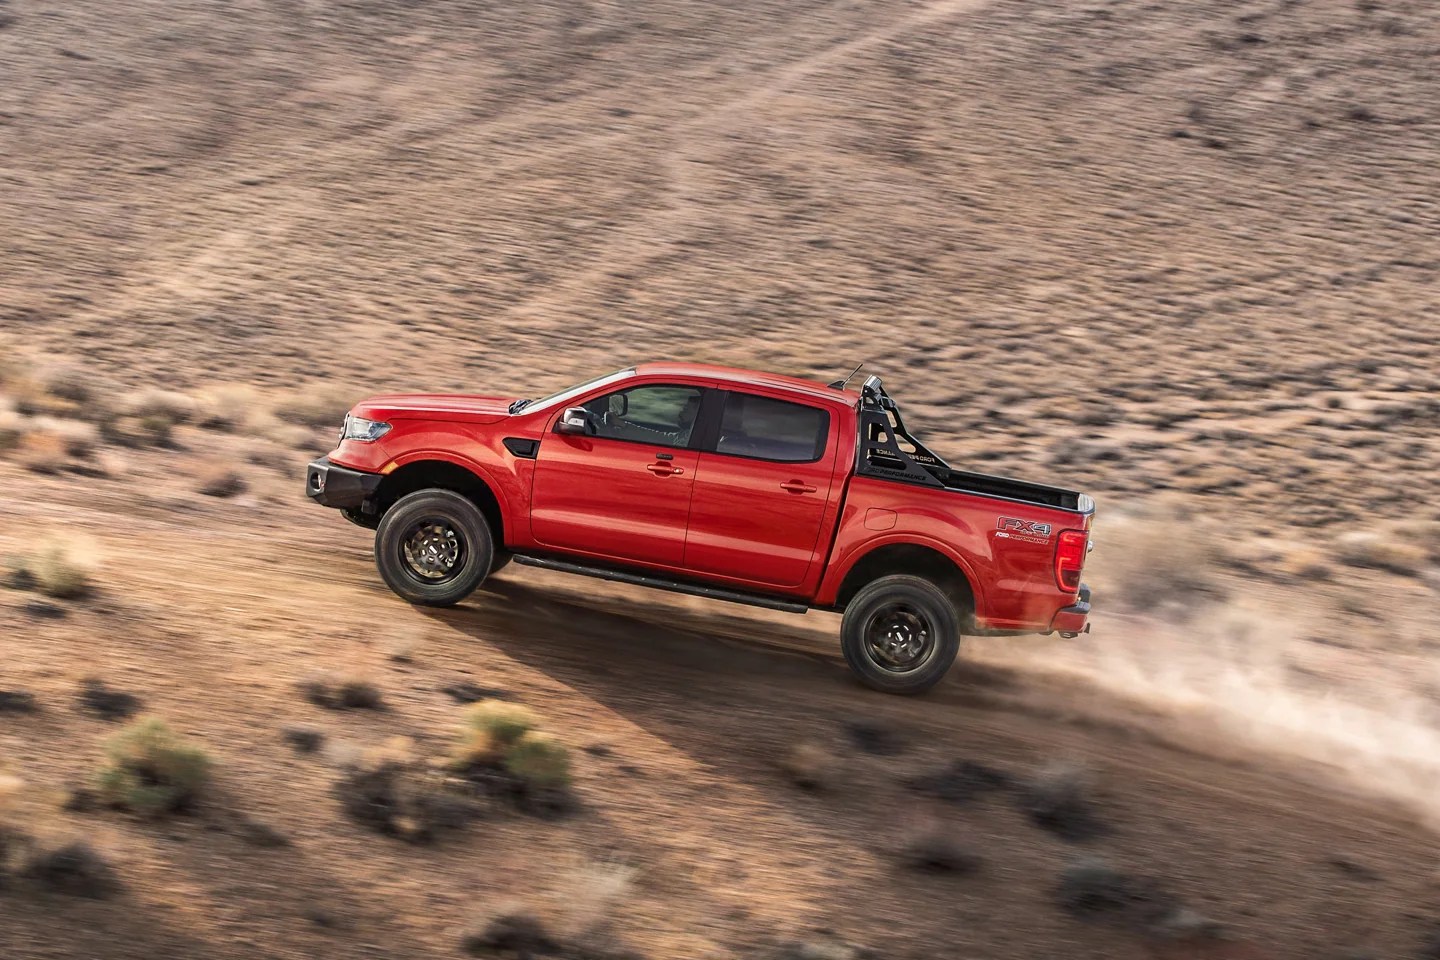 The 2022 Ford Ranger is a mid-size truck that can handle serious off-road terrain.